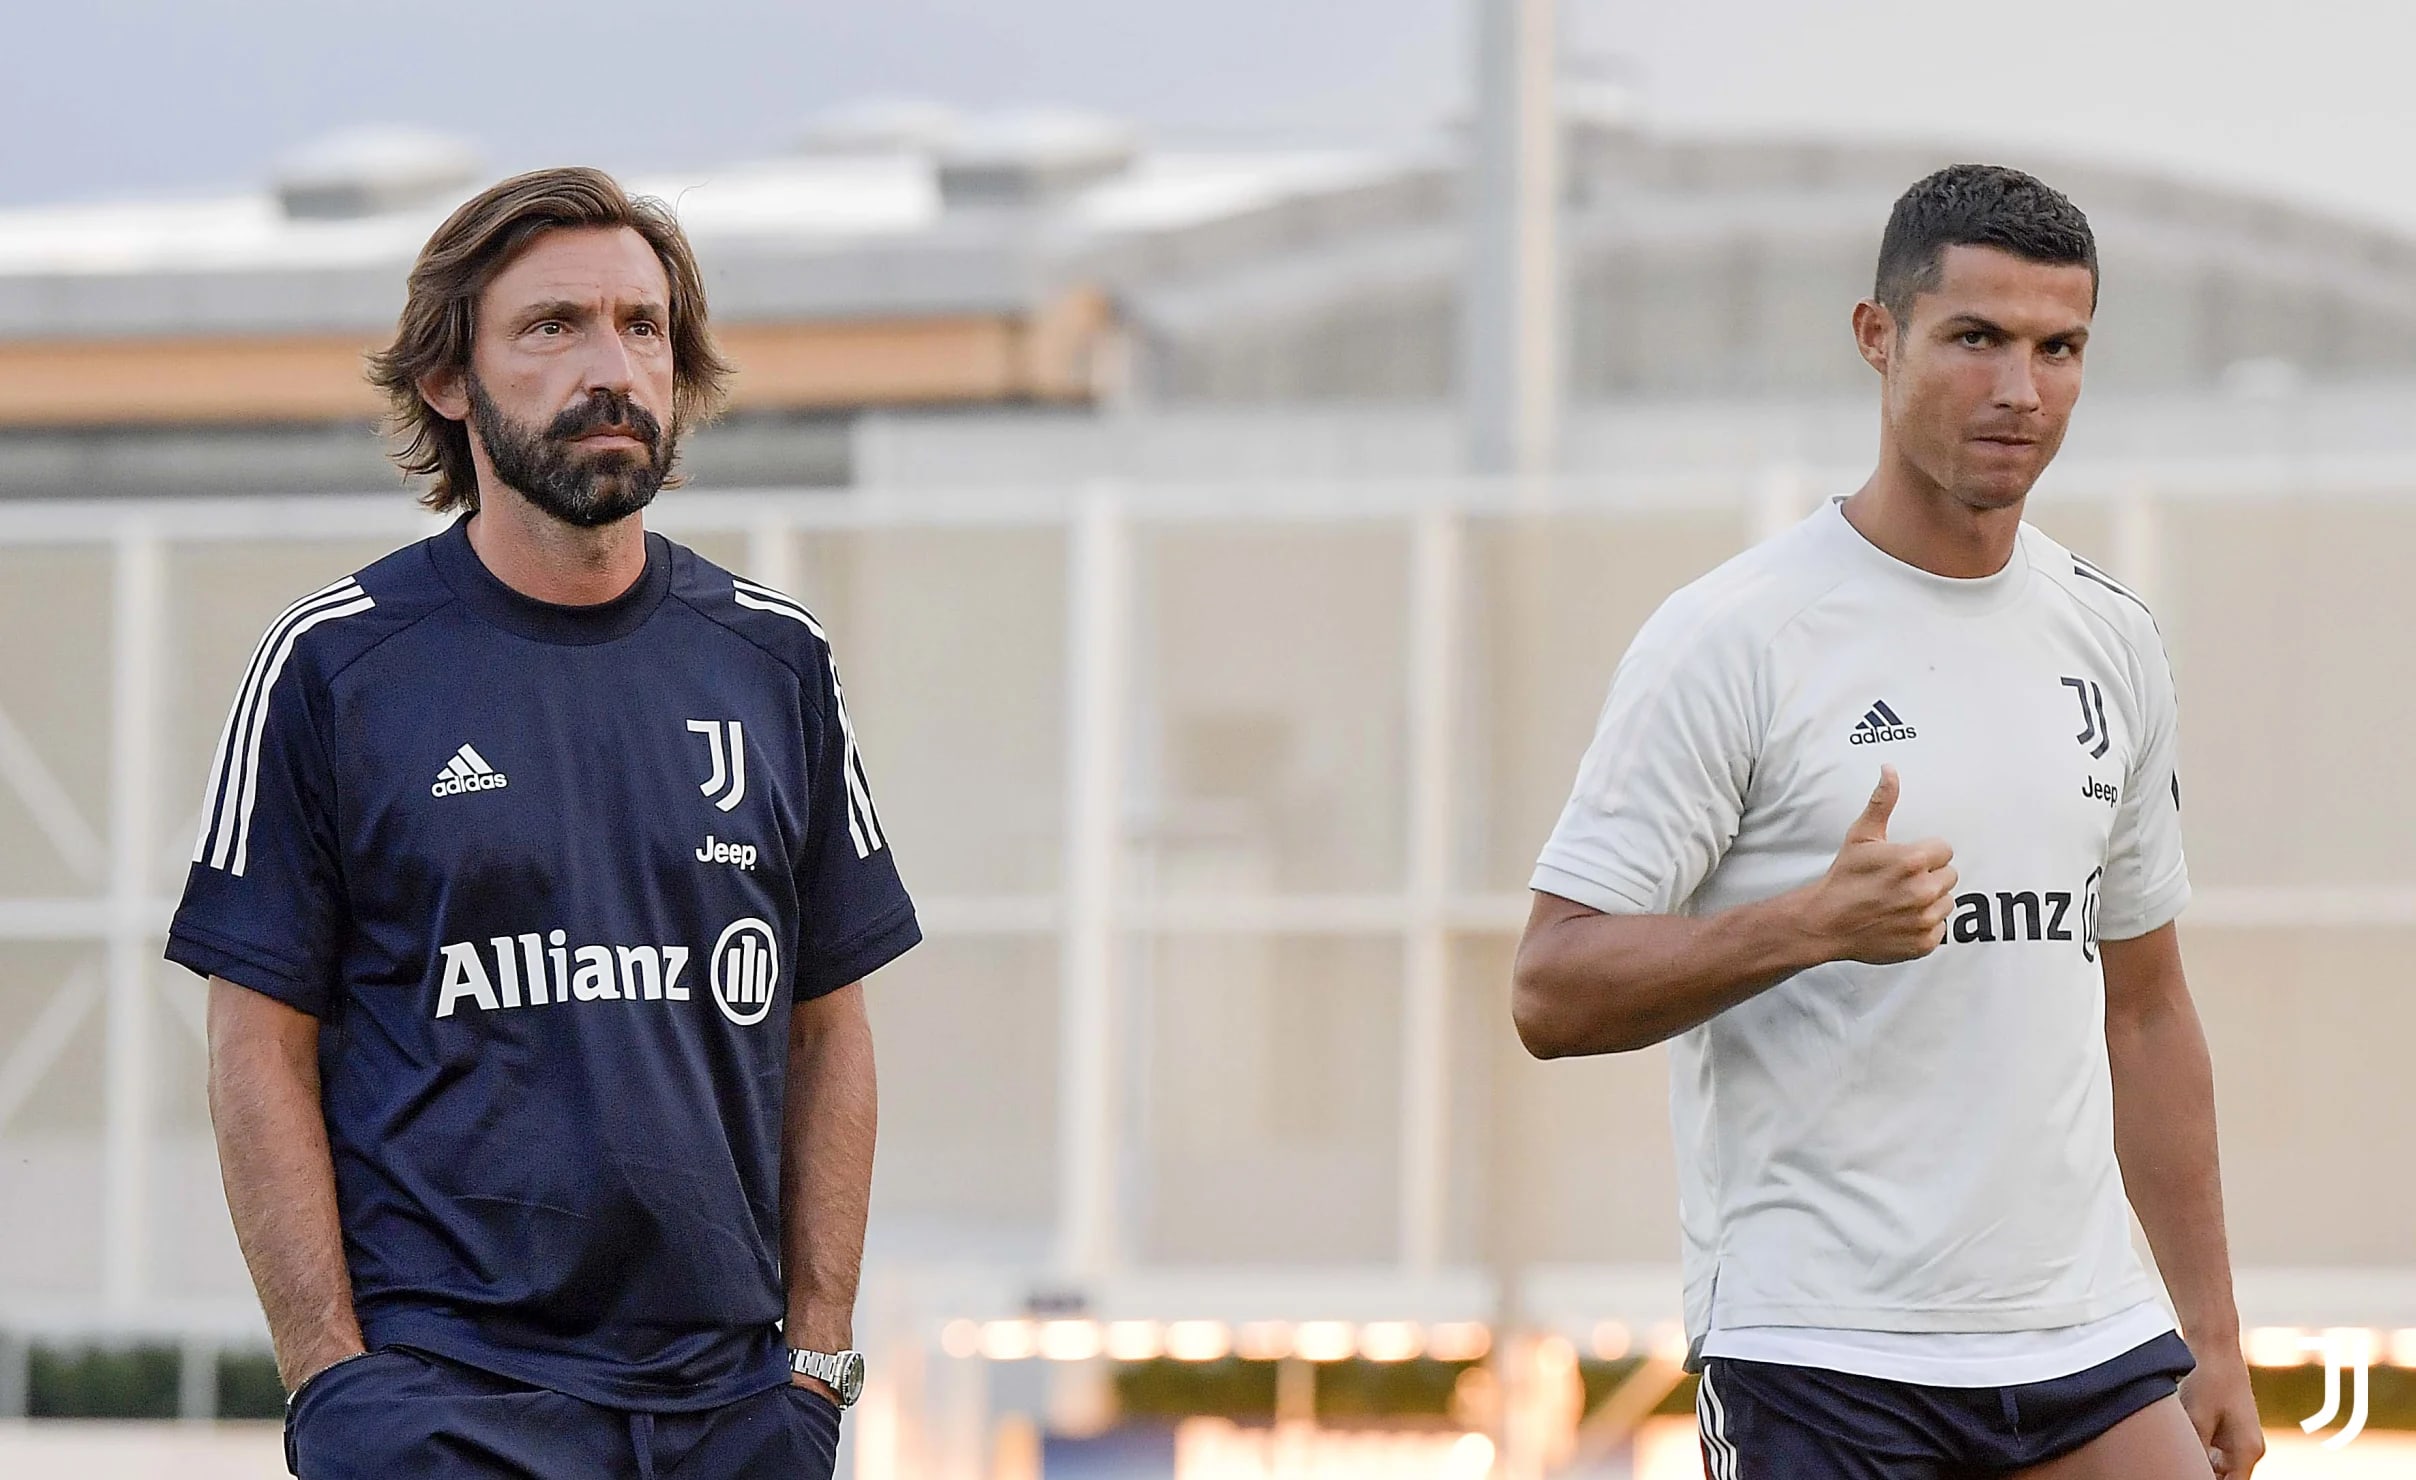 Juventus head coach Andrea Pirlo shared his thoughts on the final meeting with Napoli in the Italian Super Cup.